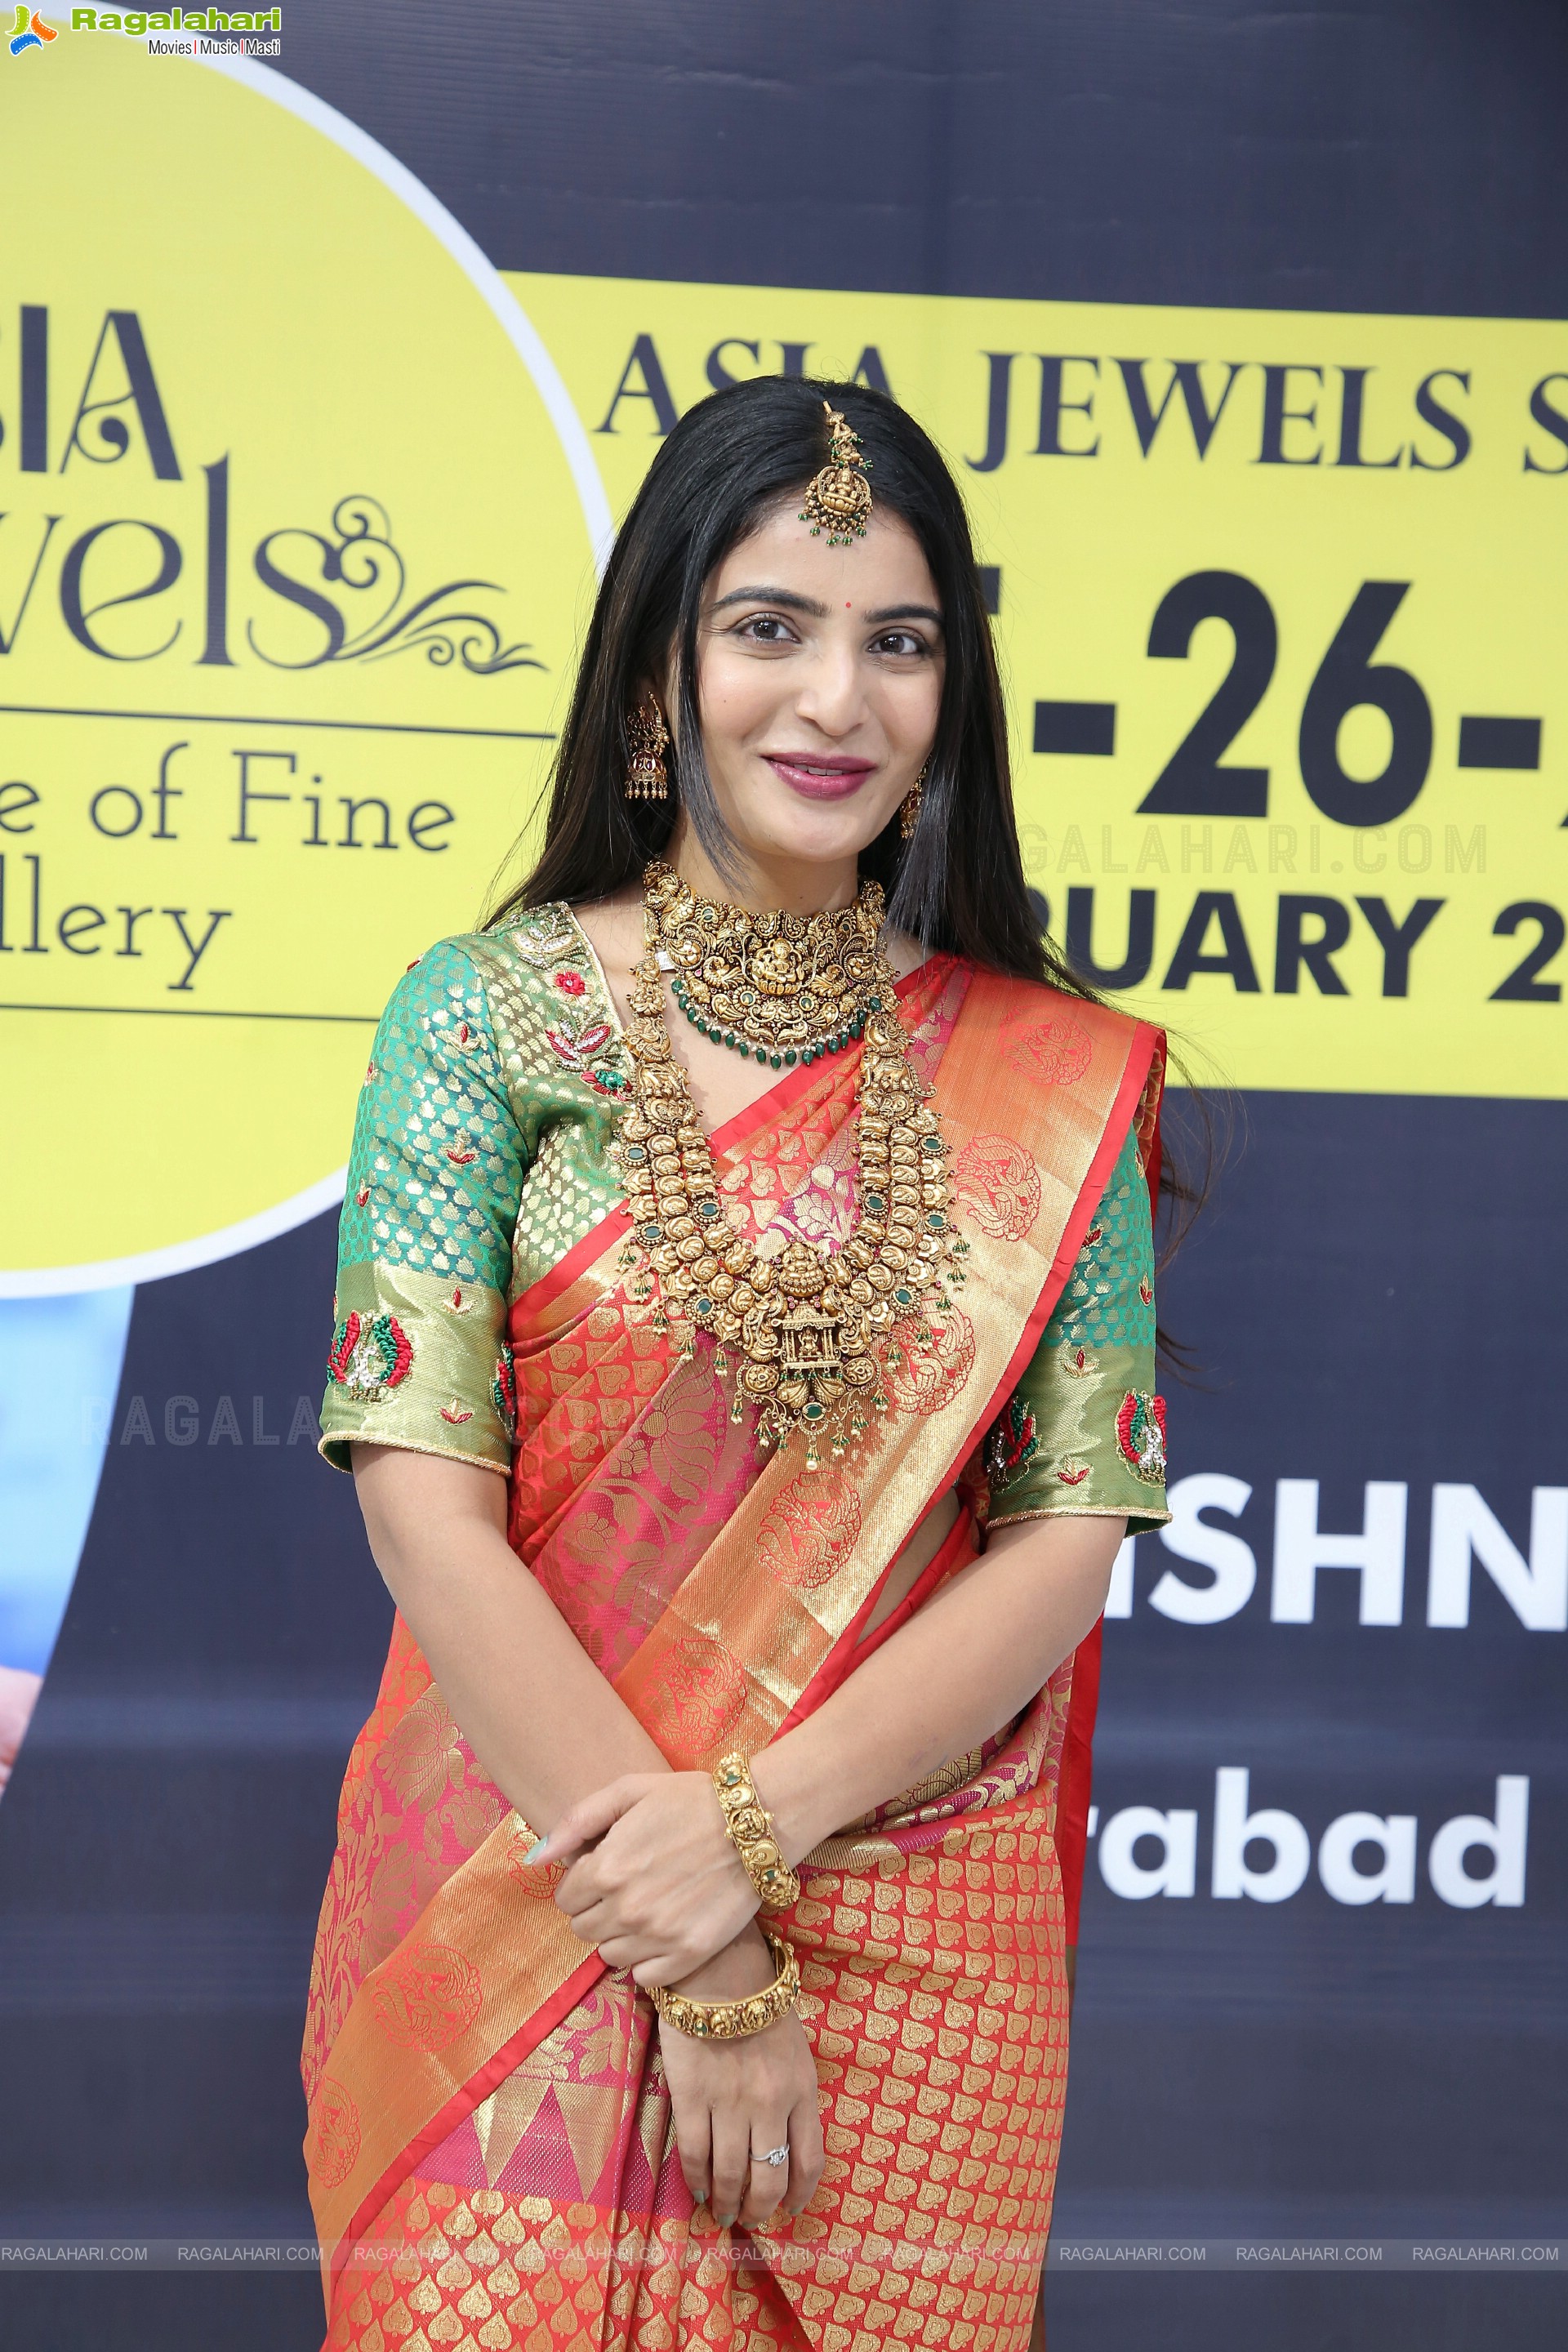 Asia Jewels Show Announcement and Exclusive Wedding & Bridal Jewellery Showcase at Banjara Hills Showroom